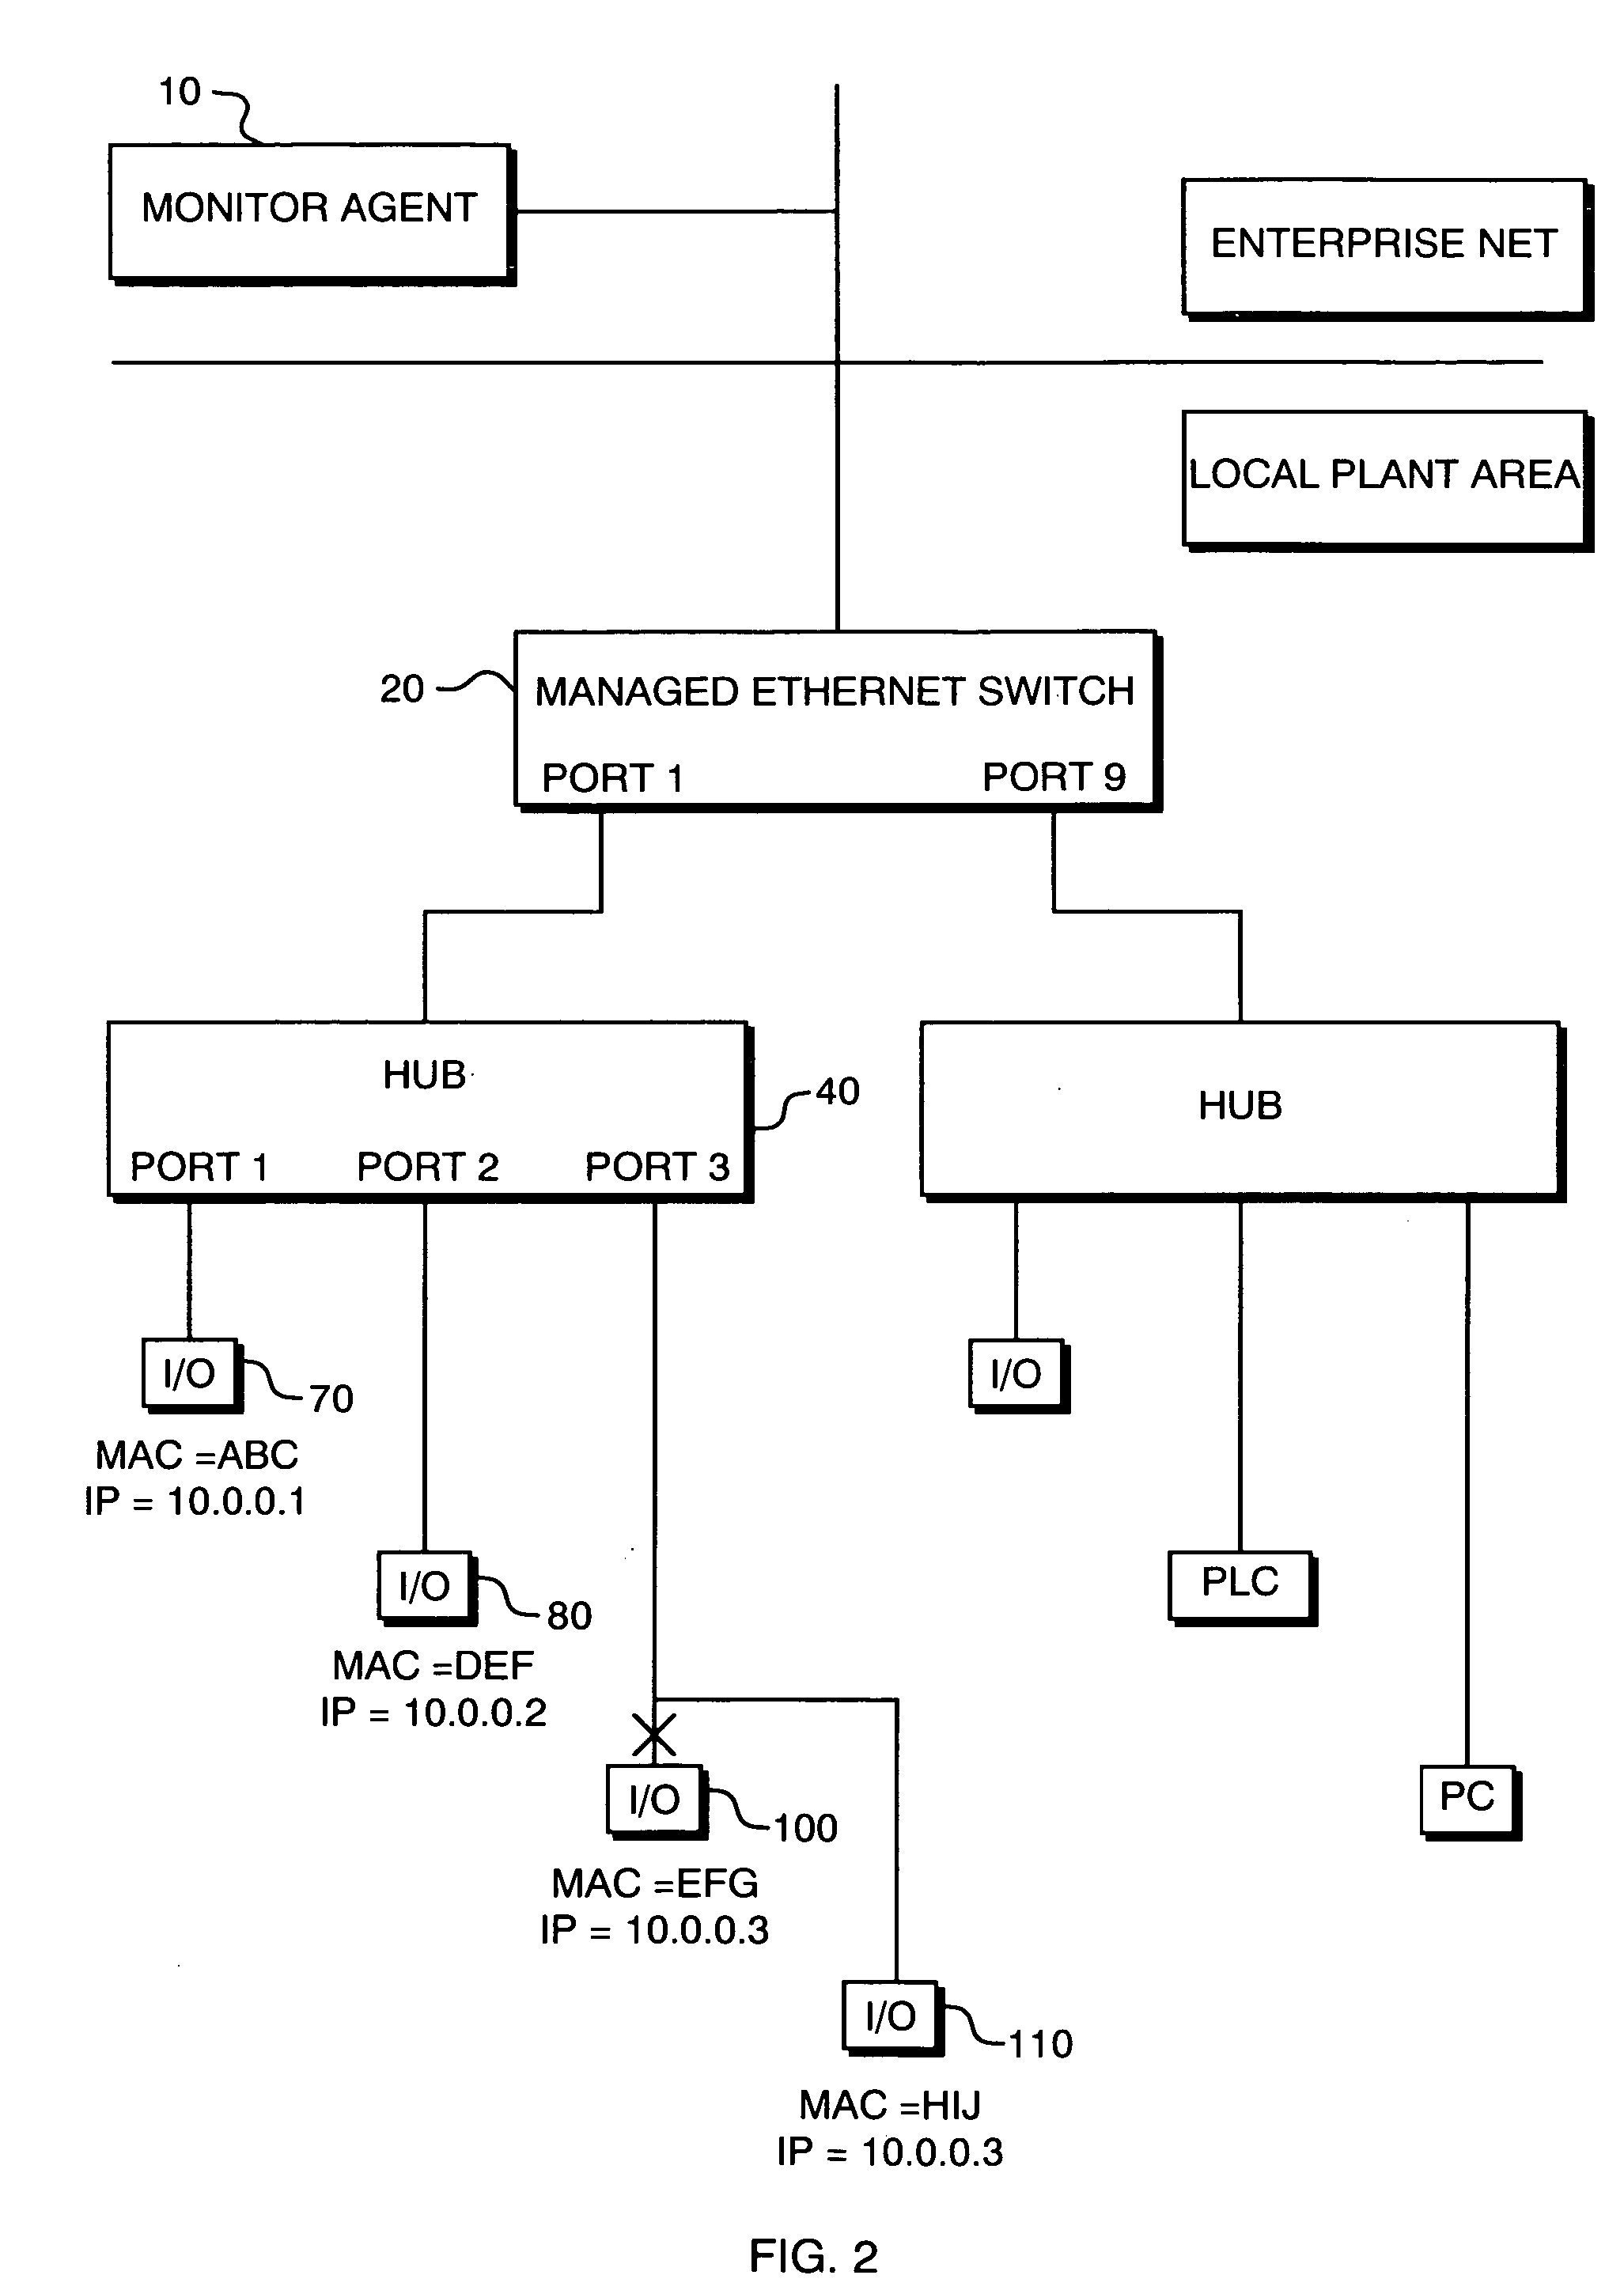 Automatic determination of correct IP address for network-connected devices